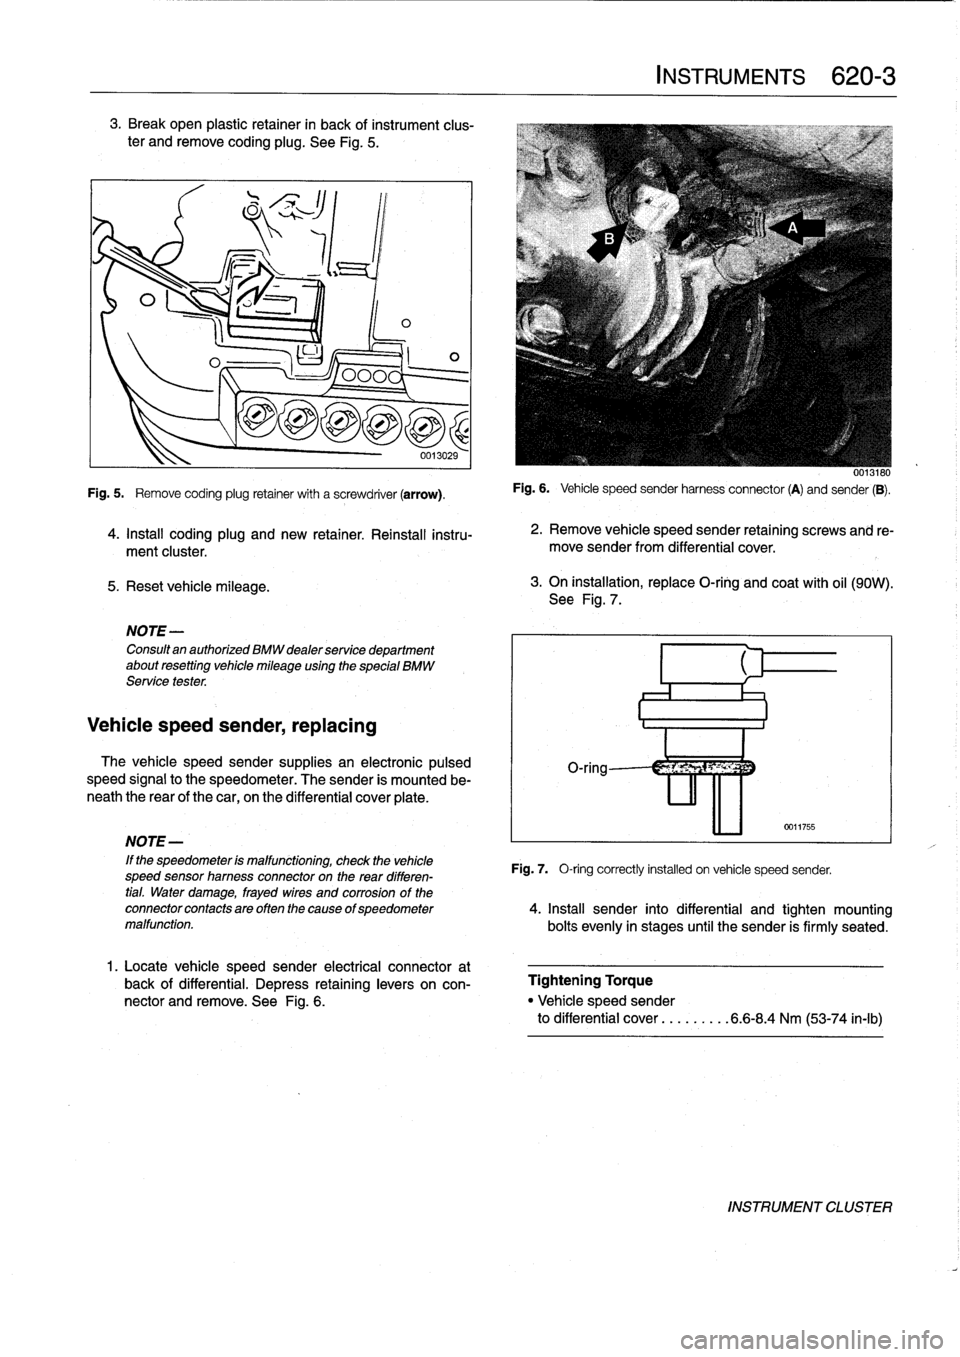 BMW 325i 1994 E36 Workshop Manual 3
.
Break
open
plastic
retainer
in
back
of
instrument
clus-
ter
andremove
coding
plug
.
See
Fig
.
5
.

5
.
Reset
vehicle
mileage
.

1
ILO

NOTE-

Consultan
authorized
BMW
dealer
service
department
abo